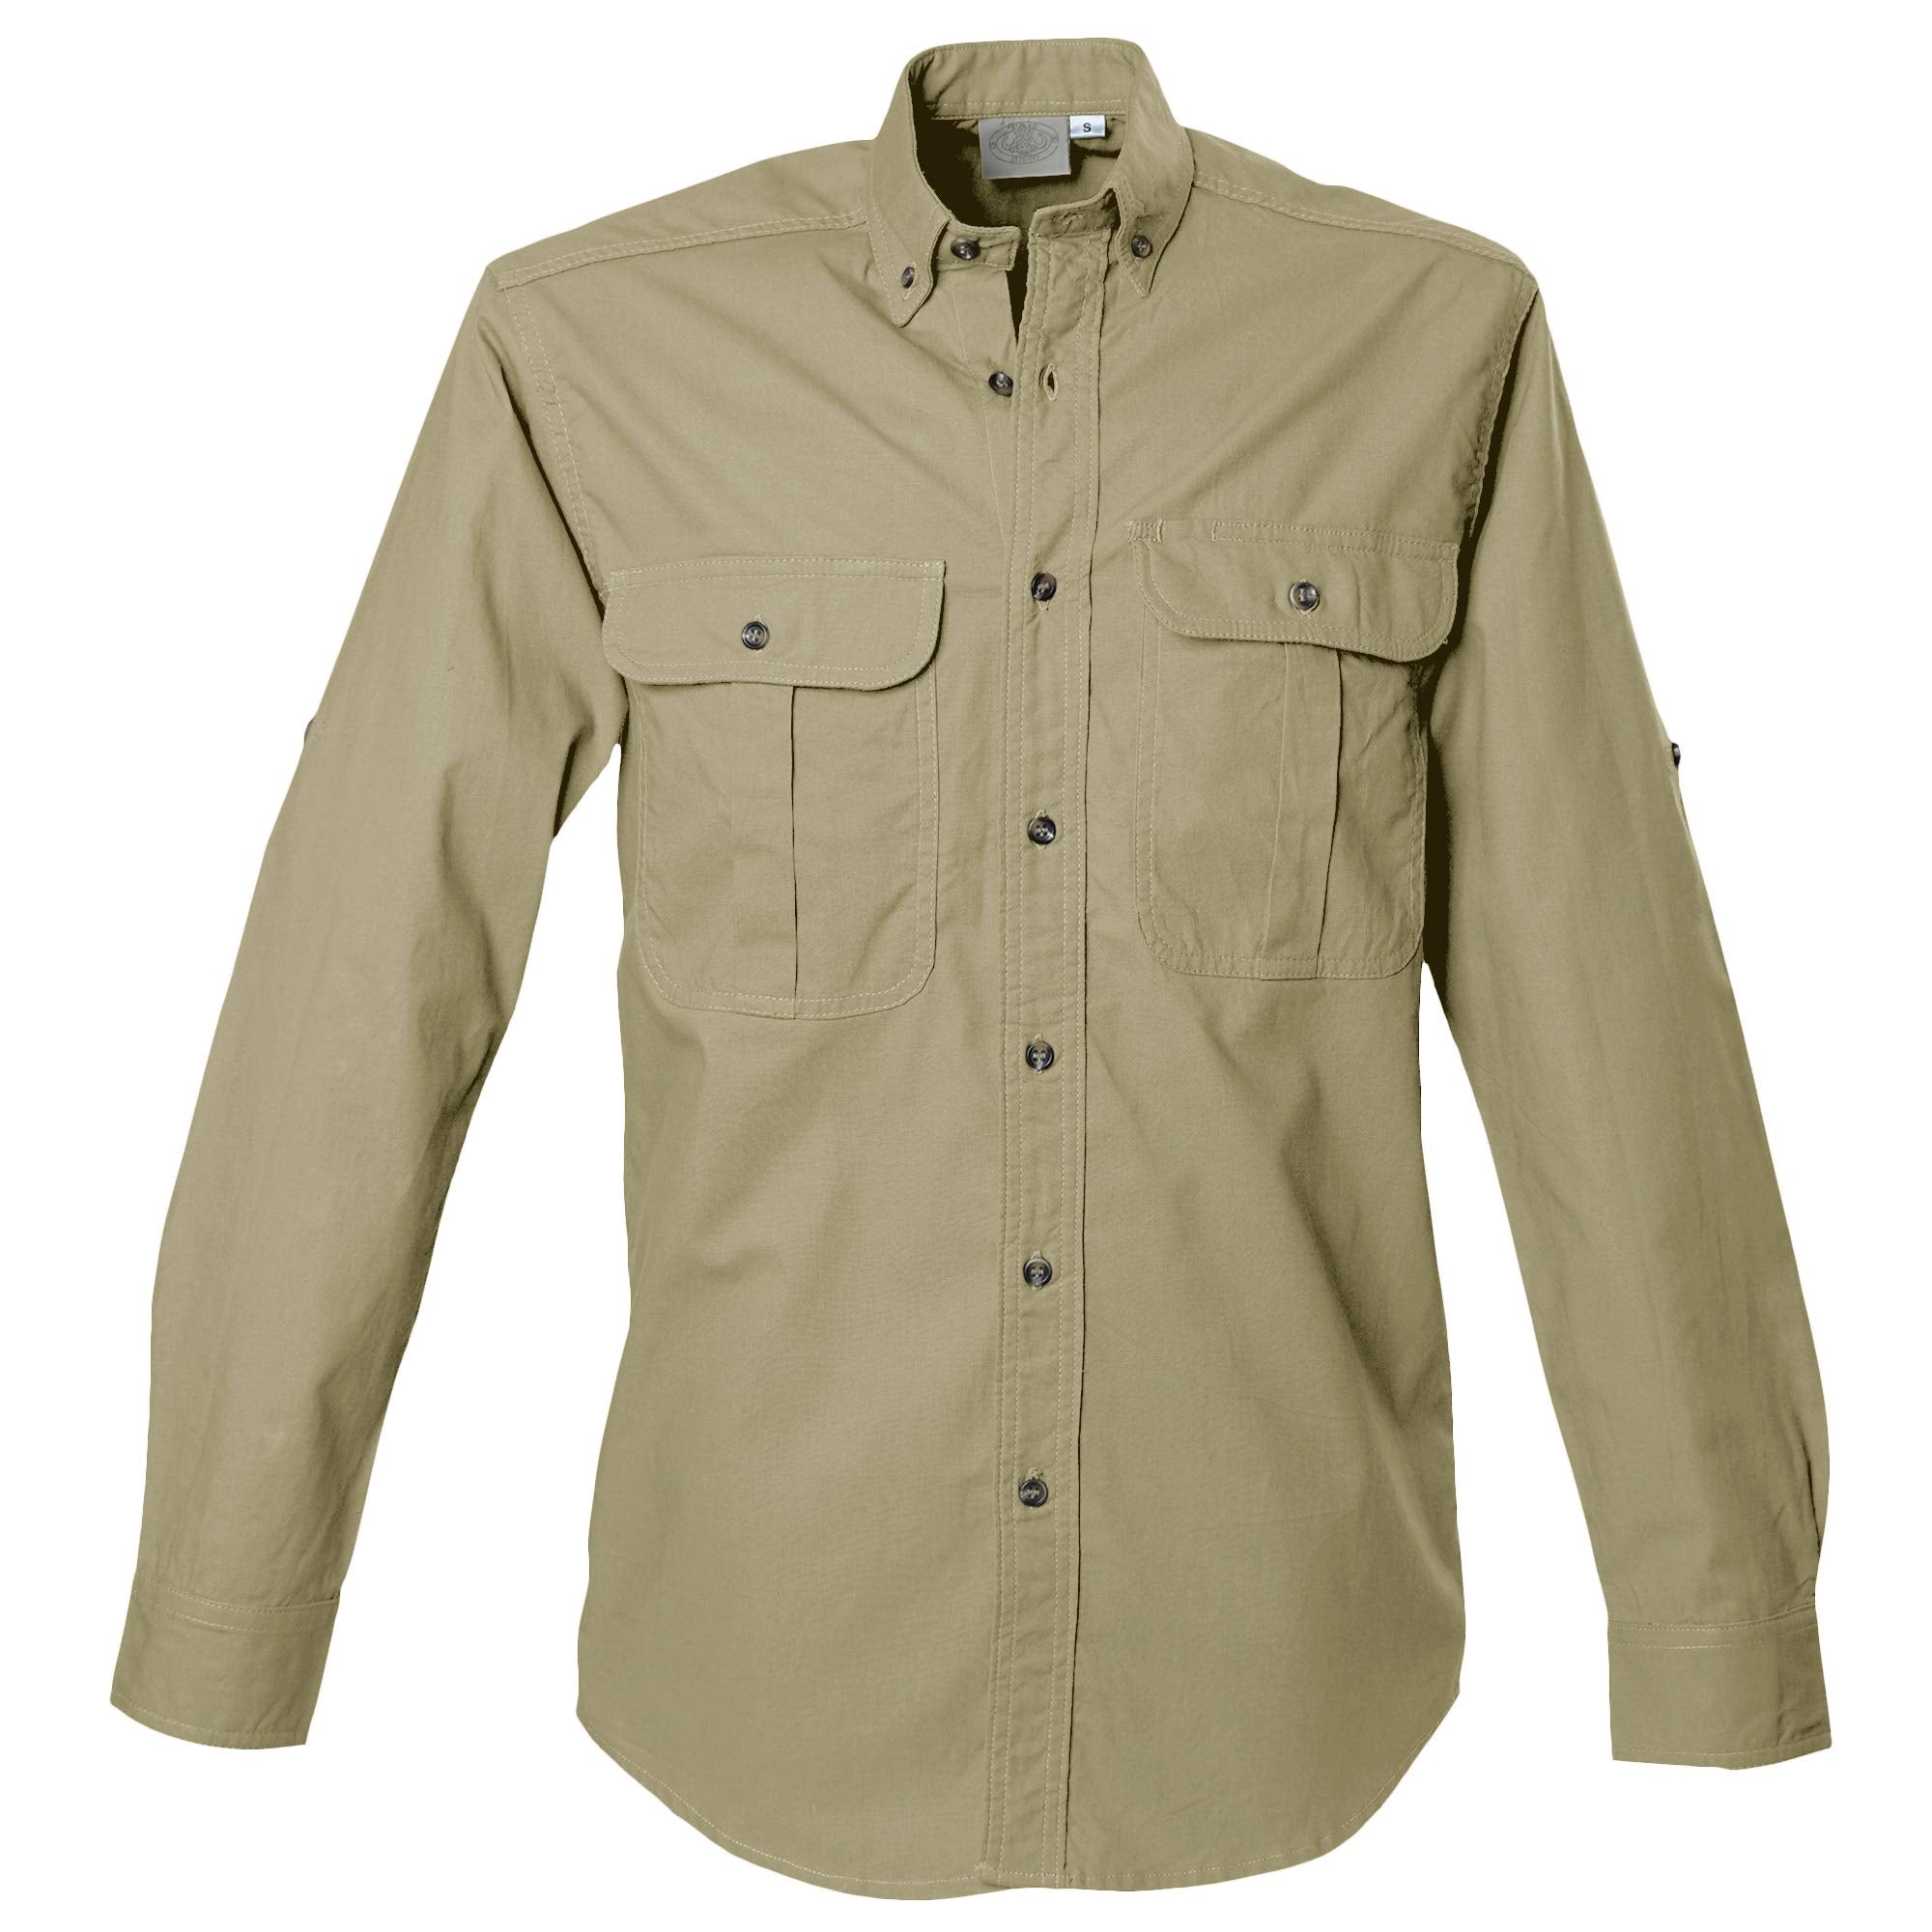 Embroidered Tie-Front Safari Shirt